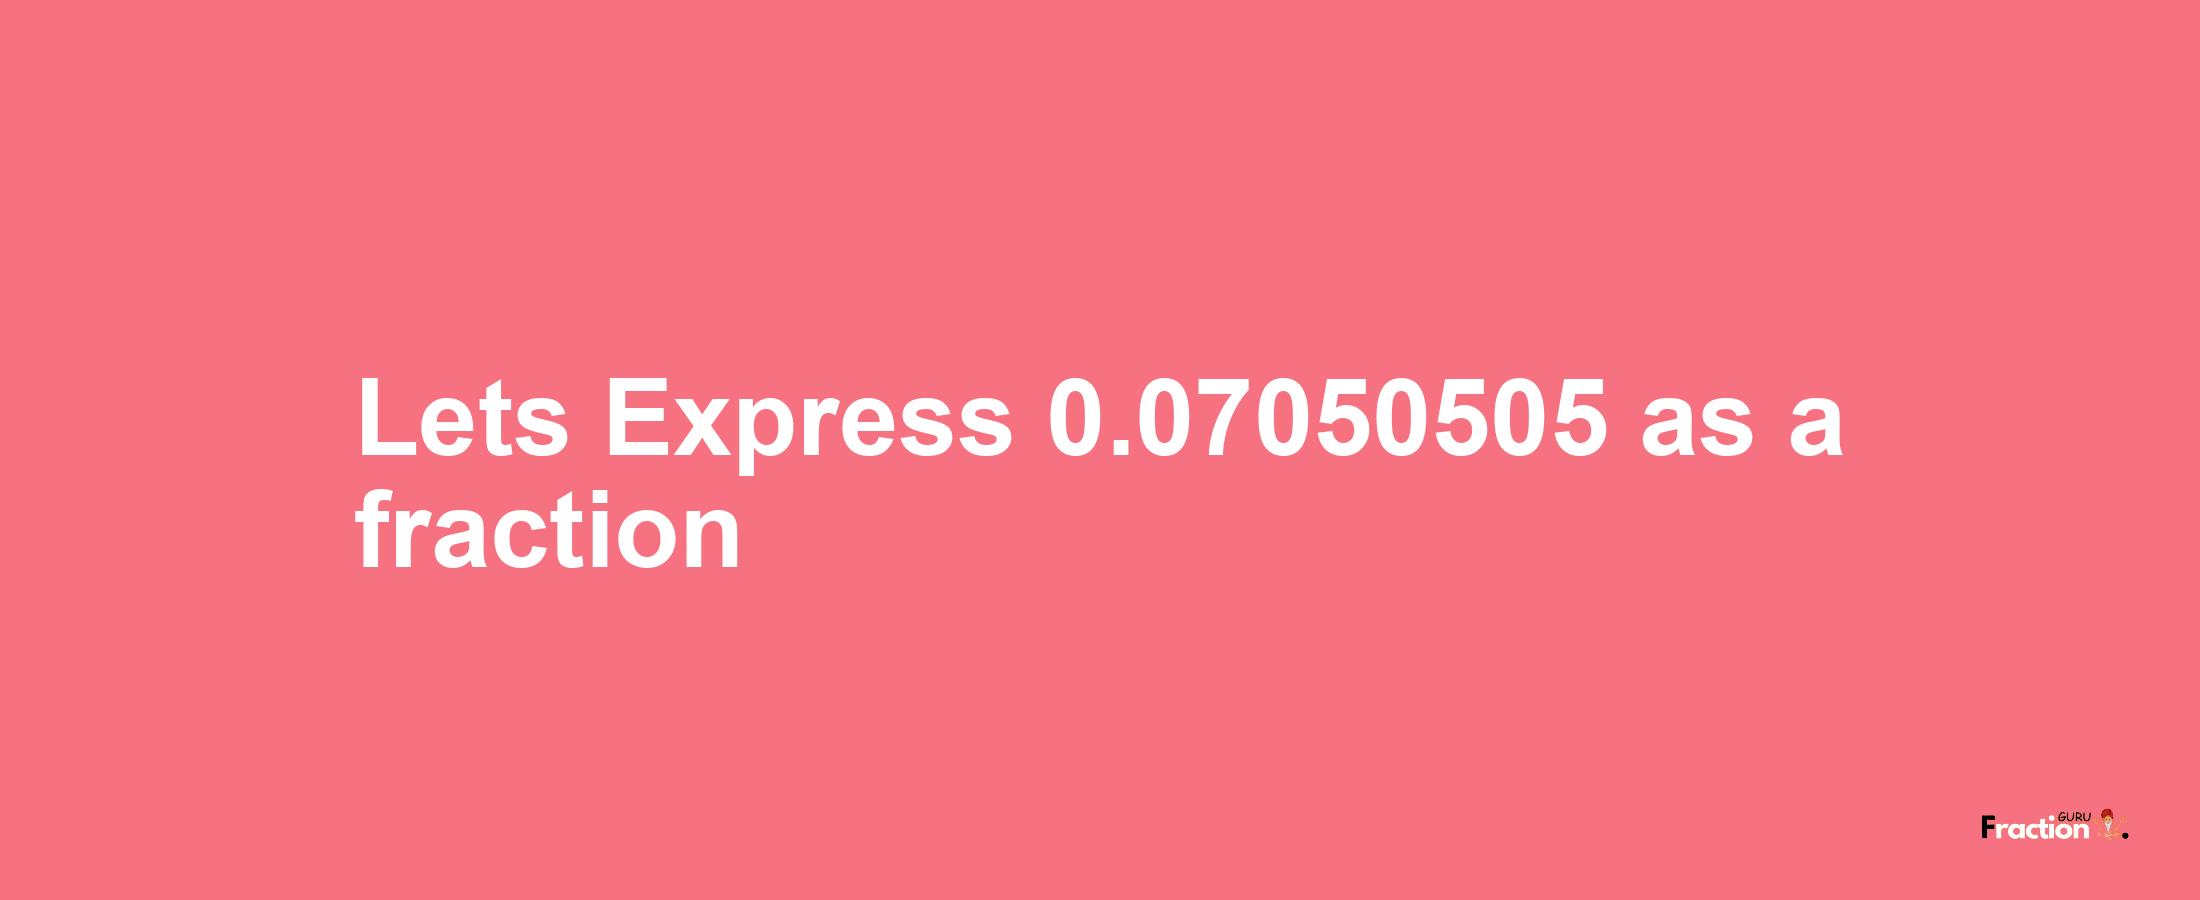 Lets Express 0.07050505 as afraction